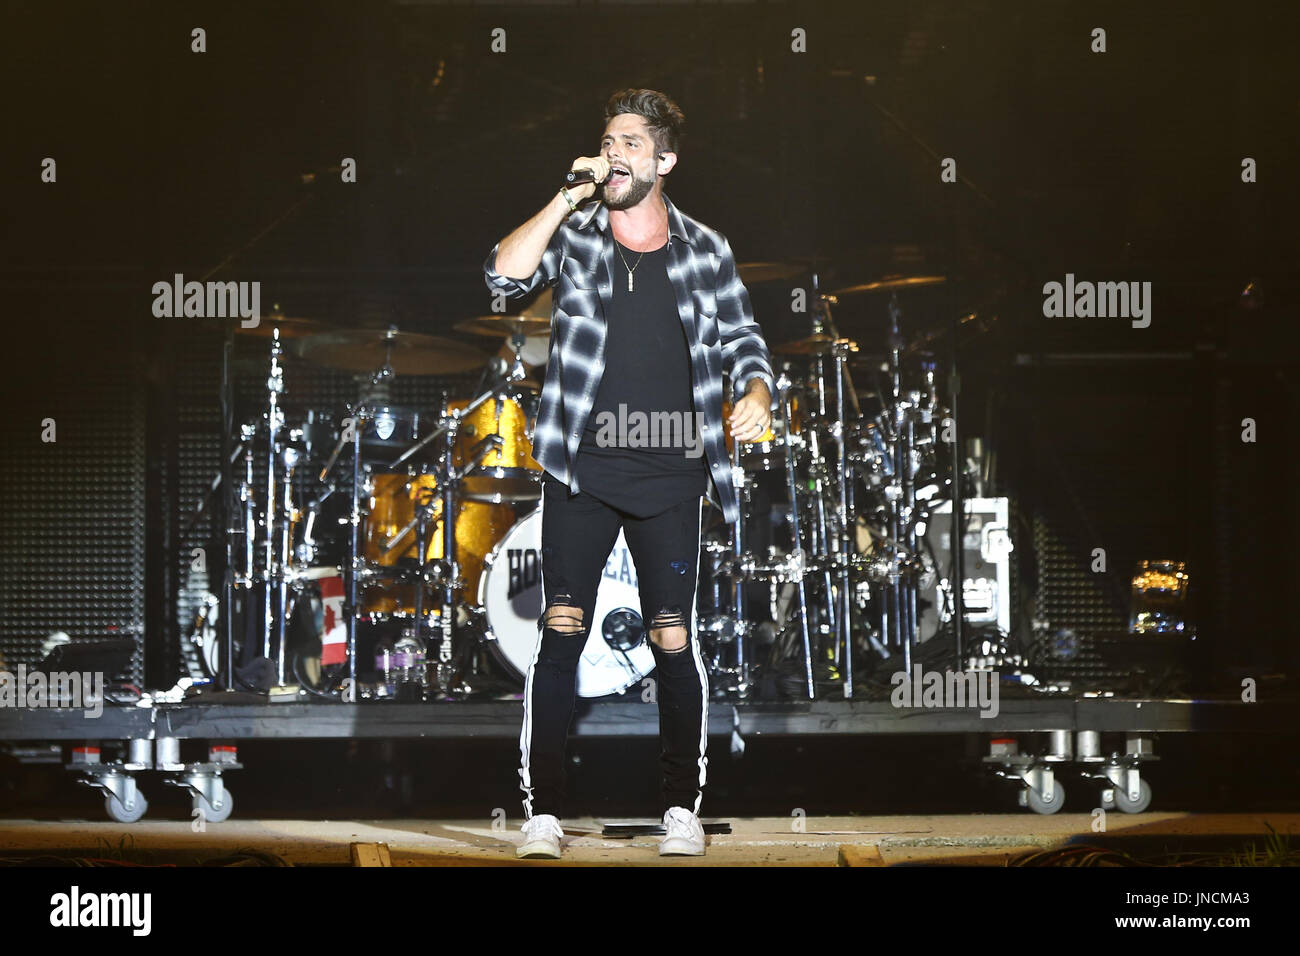 Thomas Rhett Performs at 2017 Country Thunder Music Festival on July 22, 2017 in Twin Lakes, Wisconsin Stock Photo